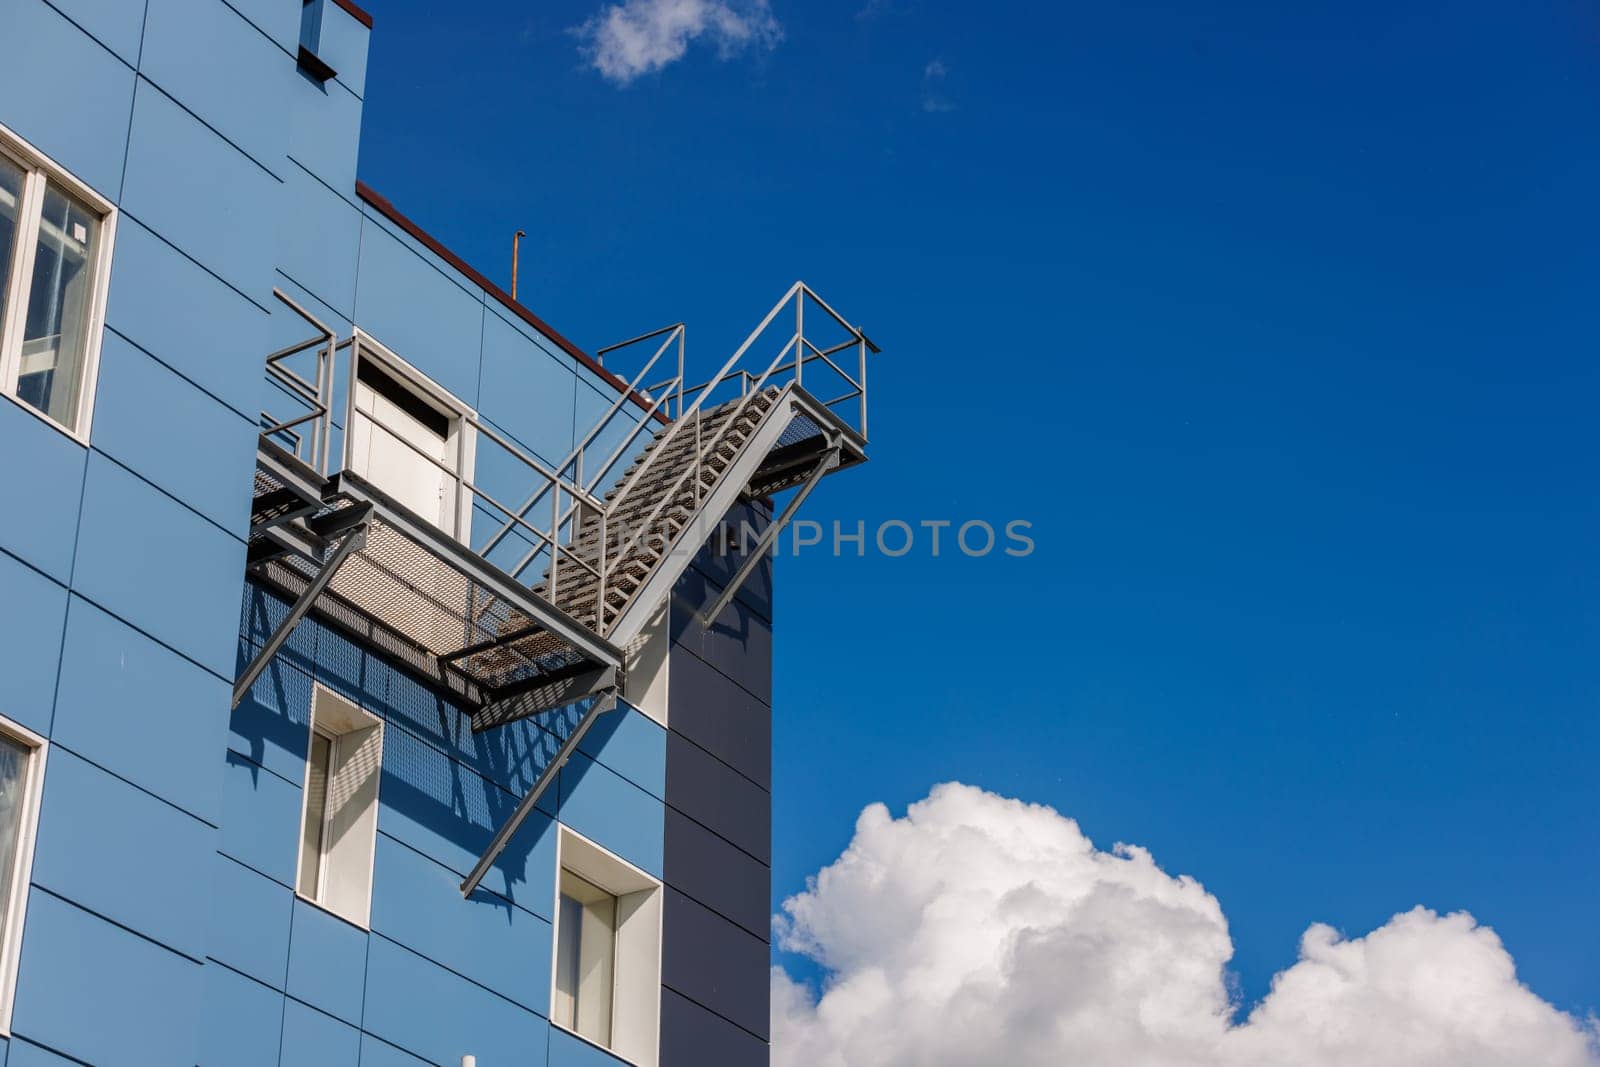 A blue office building wall with composite aluminum panels and a fire escape on the side.